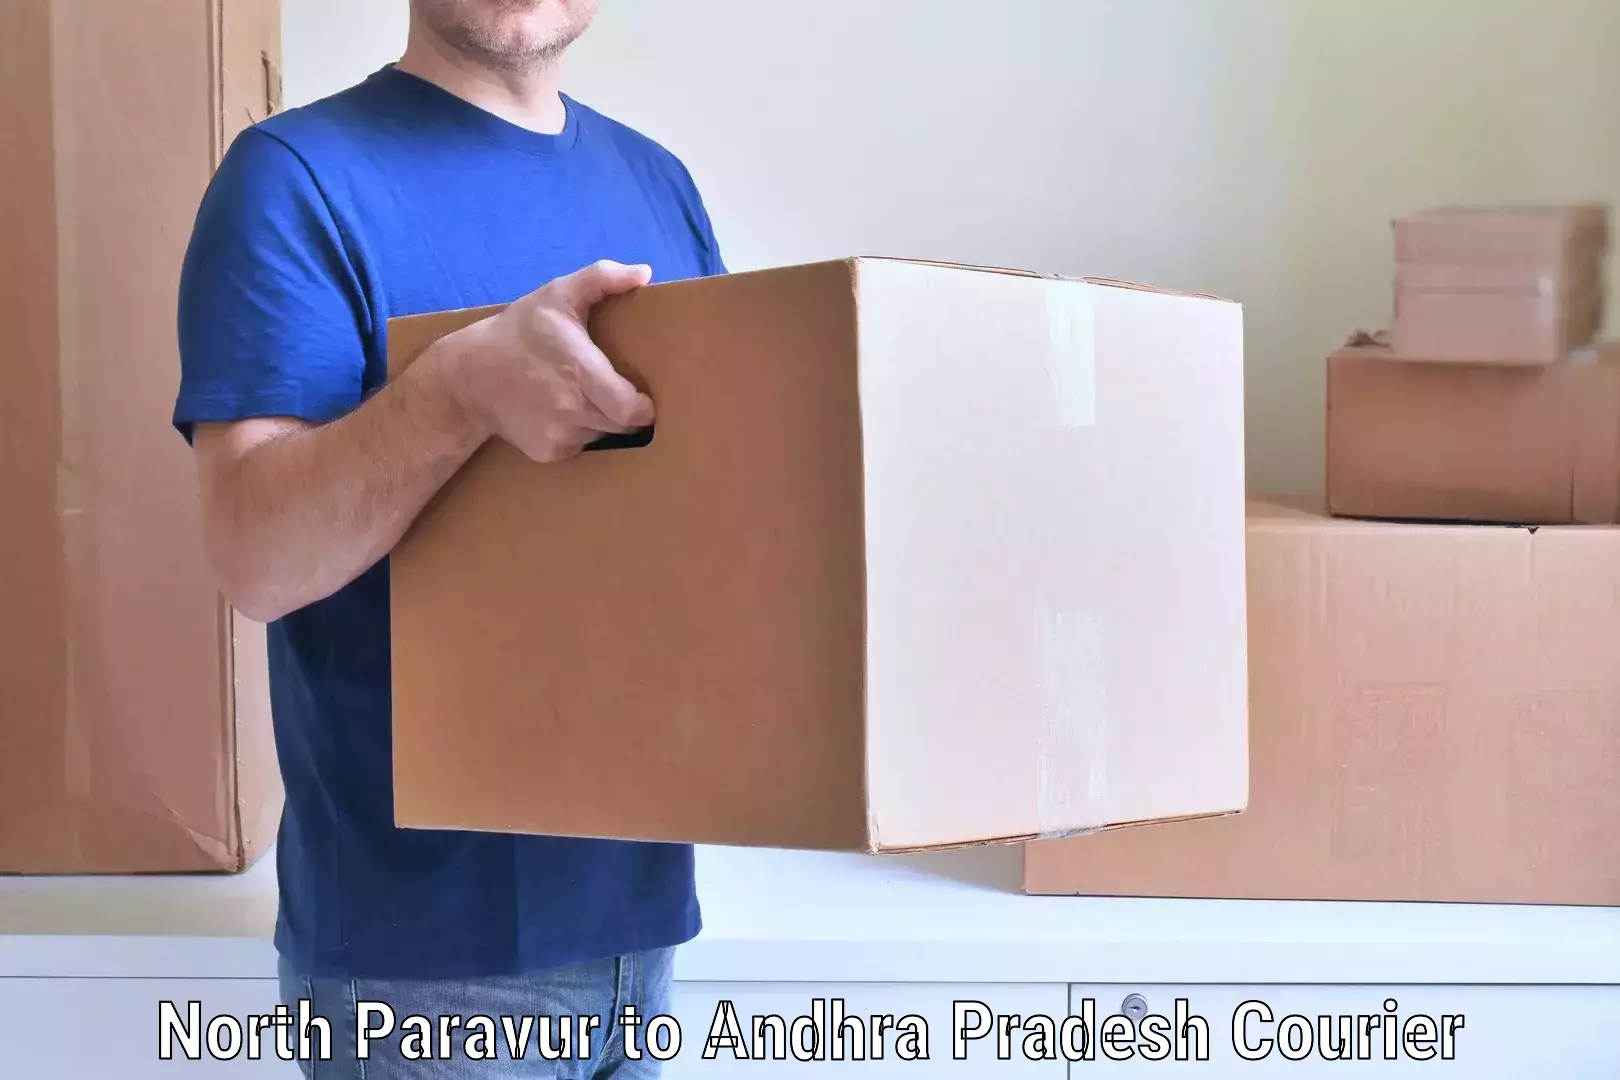 Quality moving company North Paravur to Kovvur